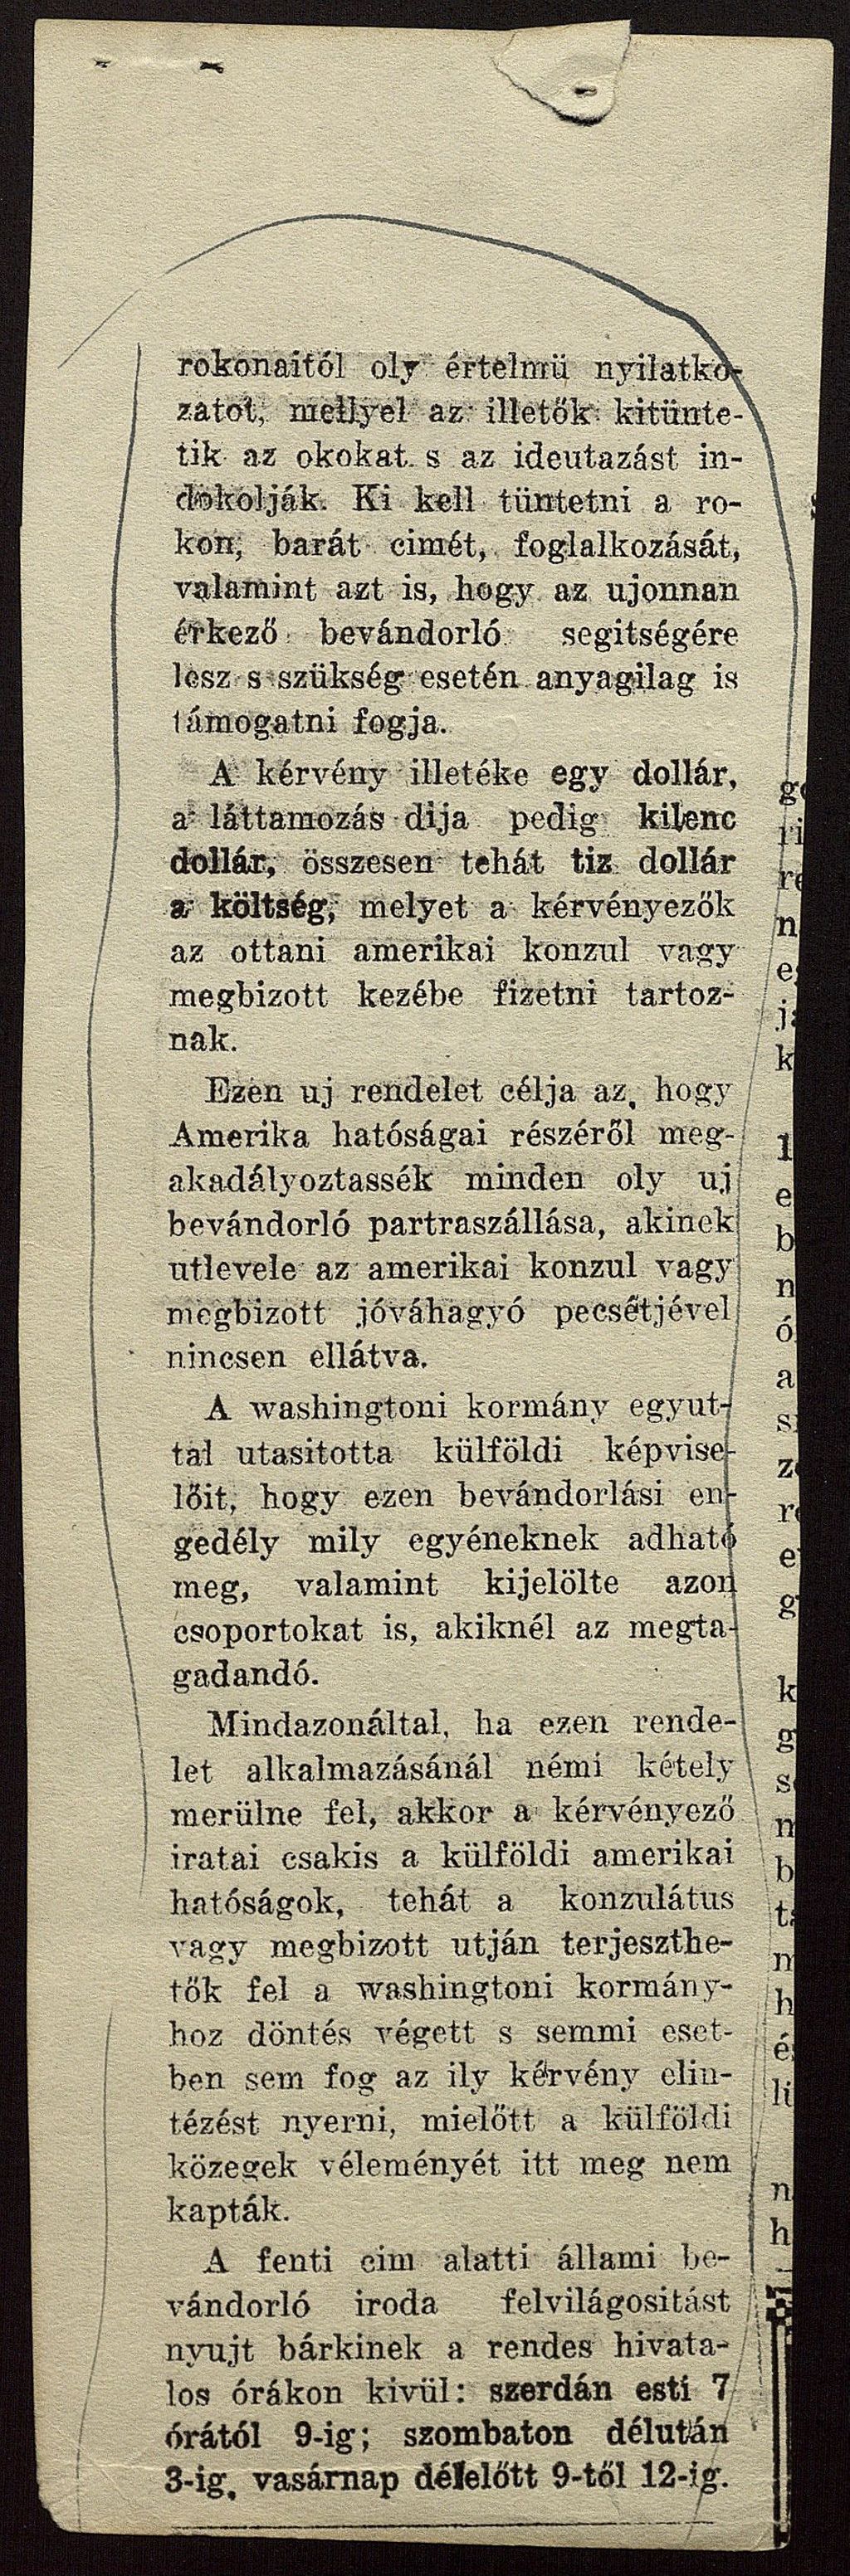 Miniature of Hungarian Refugees Clippings, 1920-1957 (Folder 46)